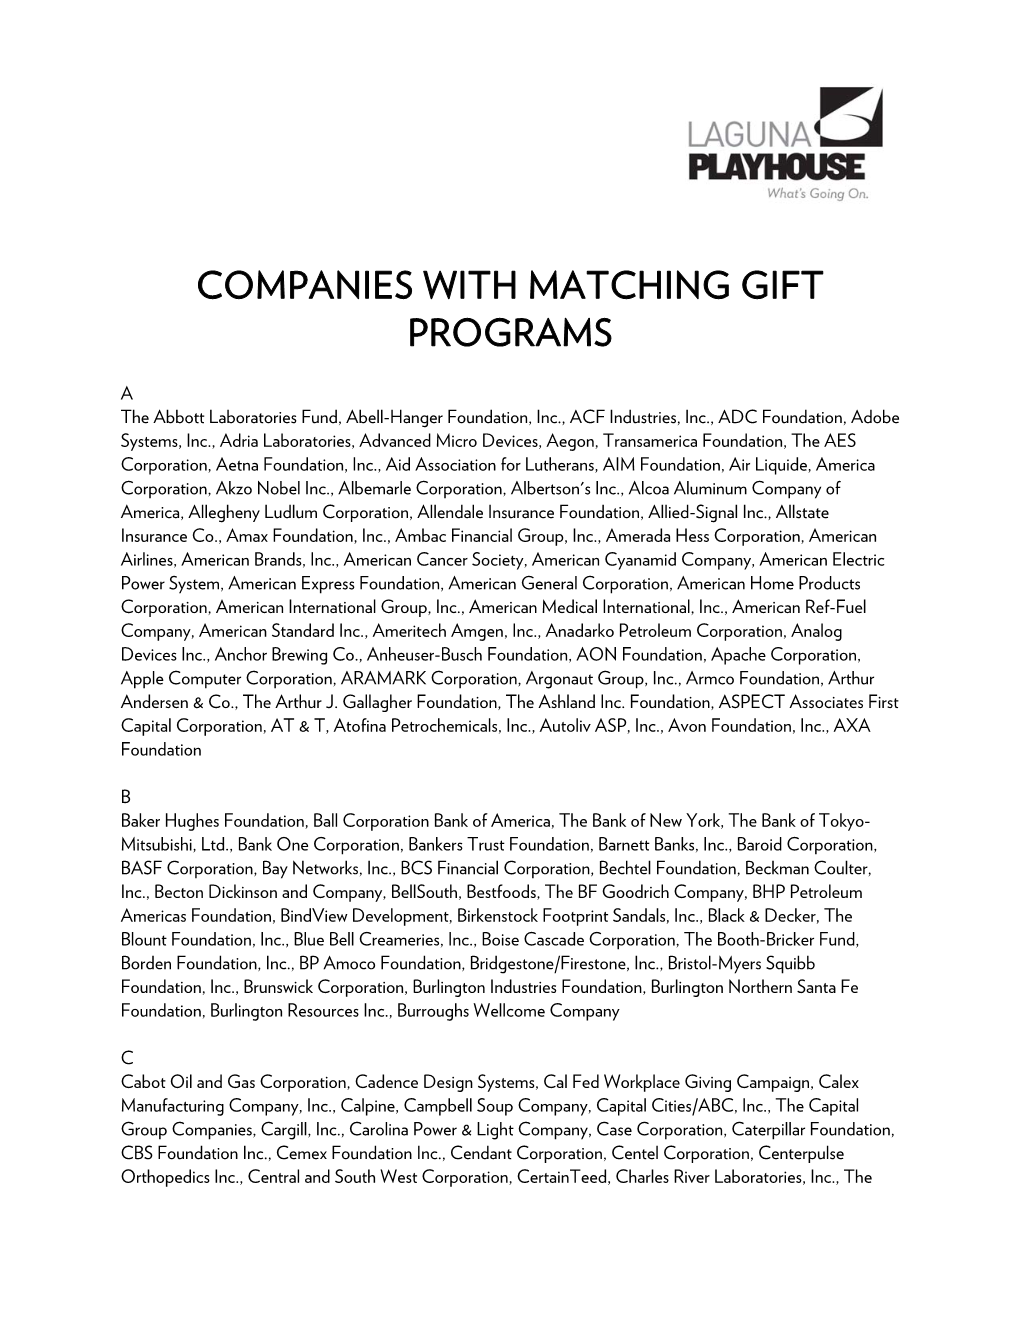 Companies with Matching Gift Programs